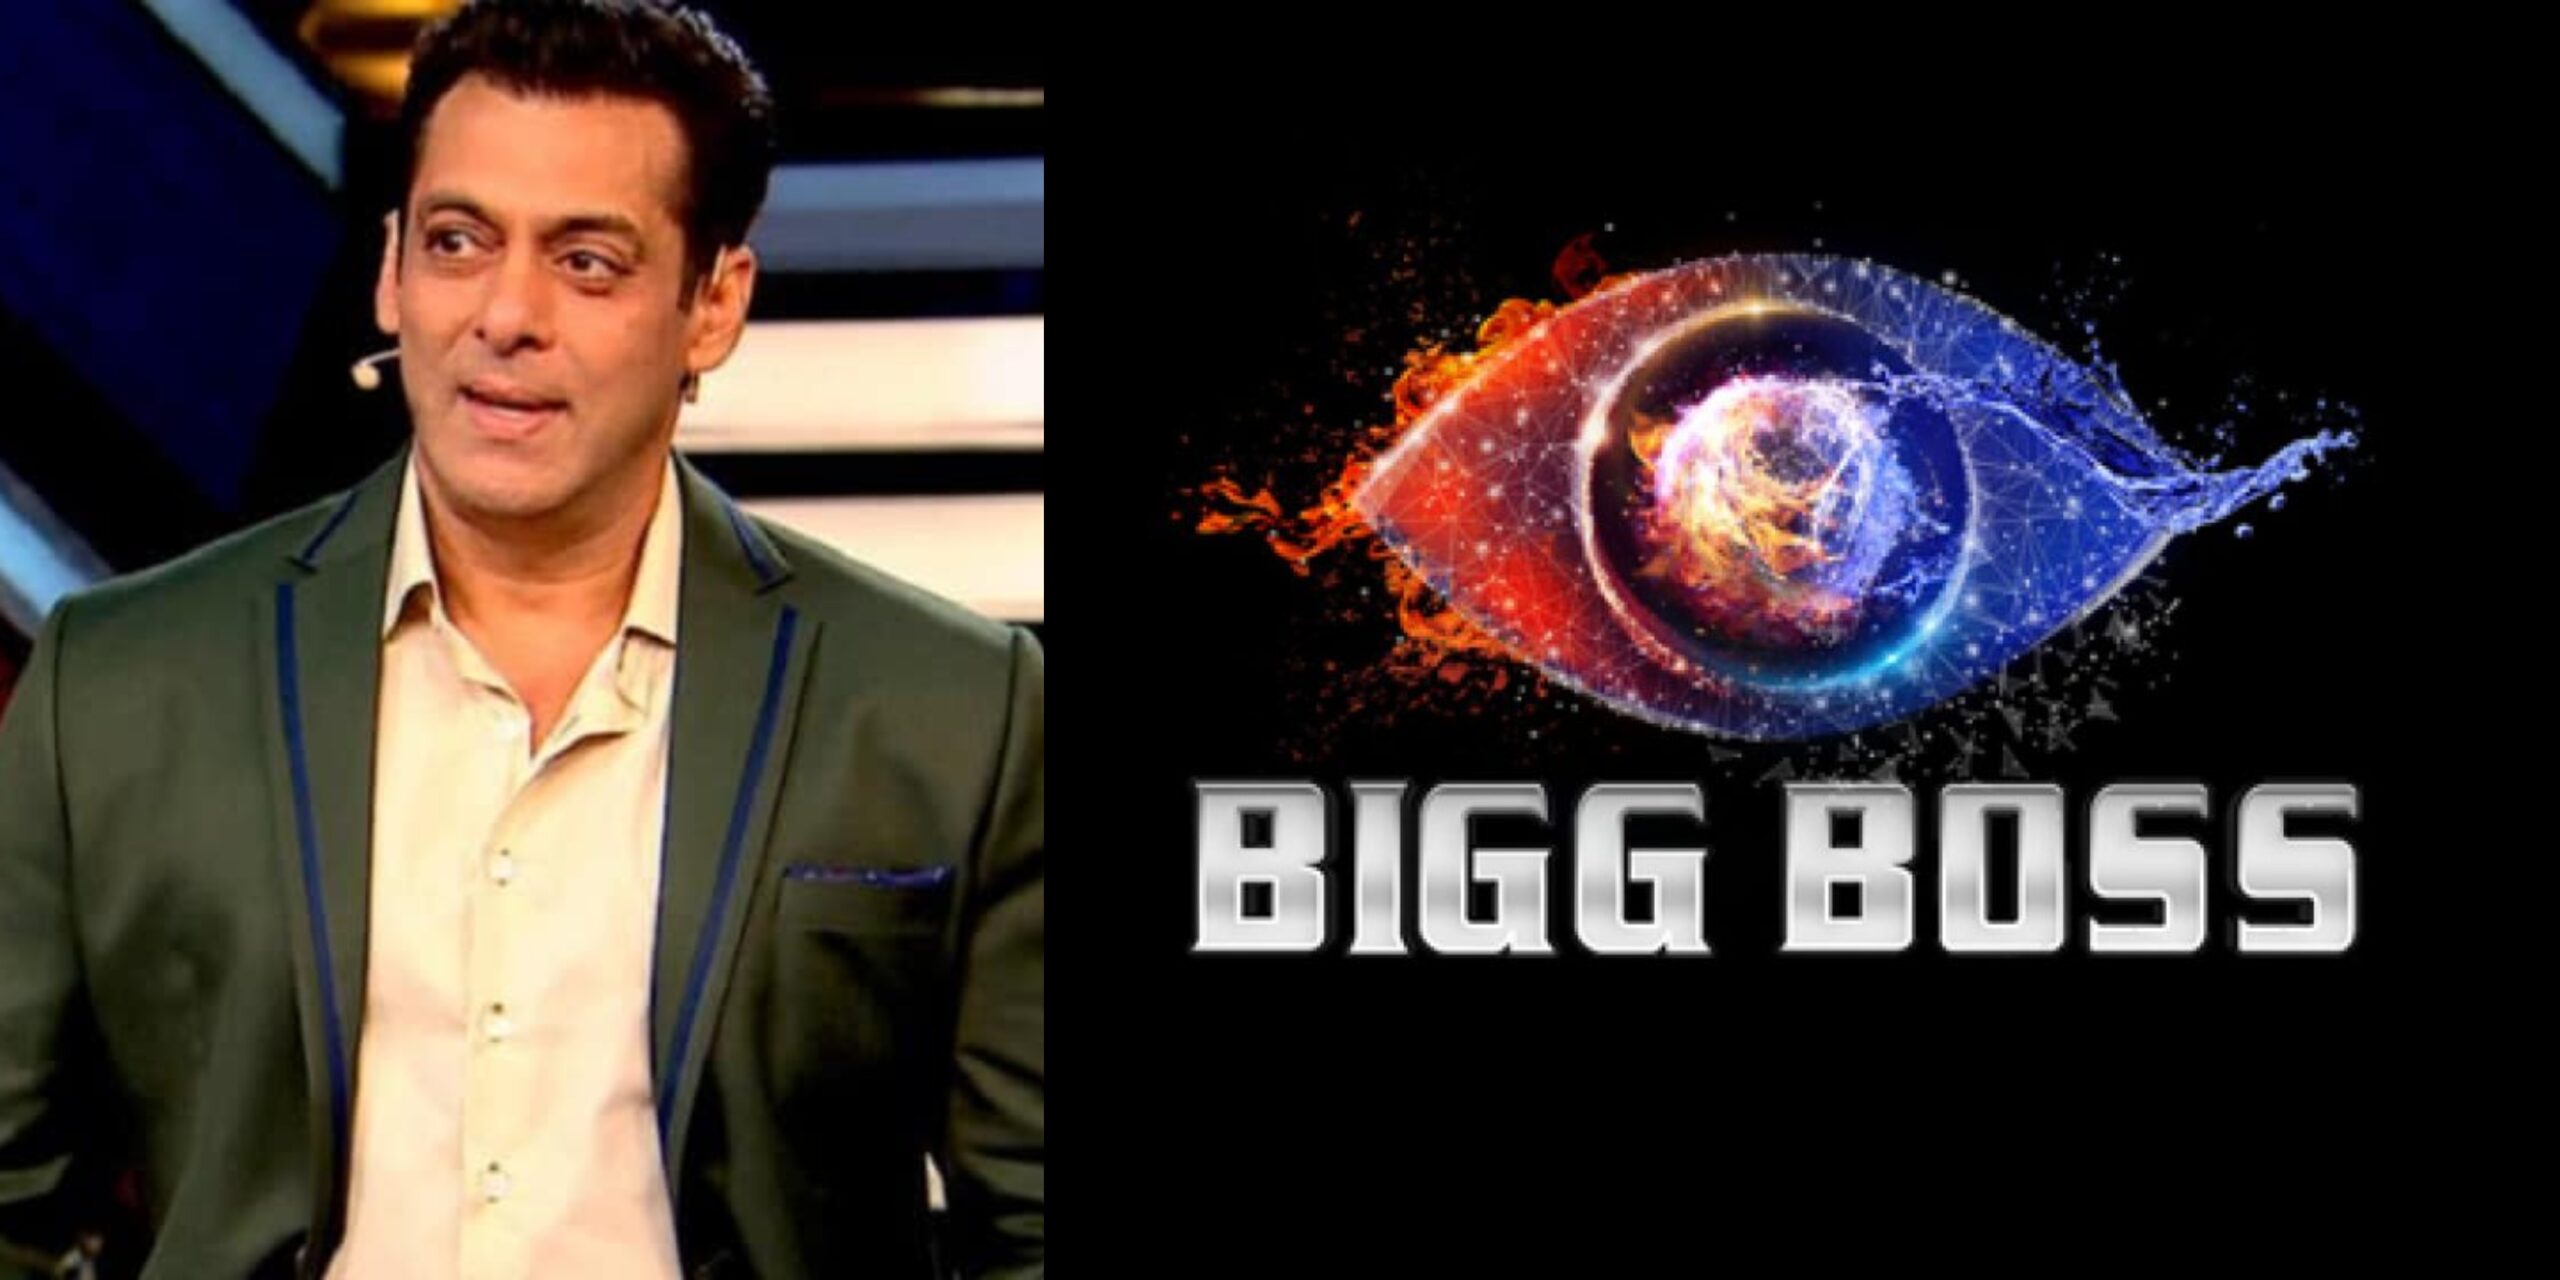 Mark 7 October Bigg Boss 14 premiering on Colors and Voot